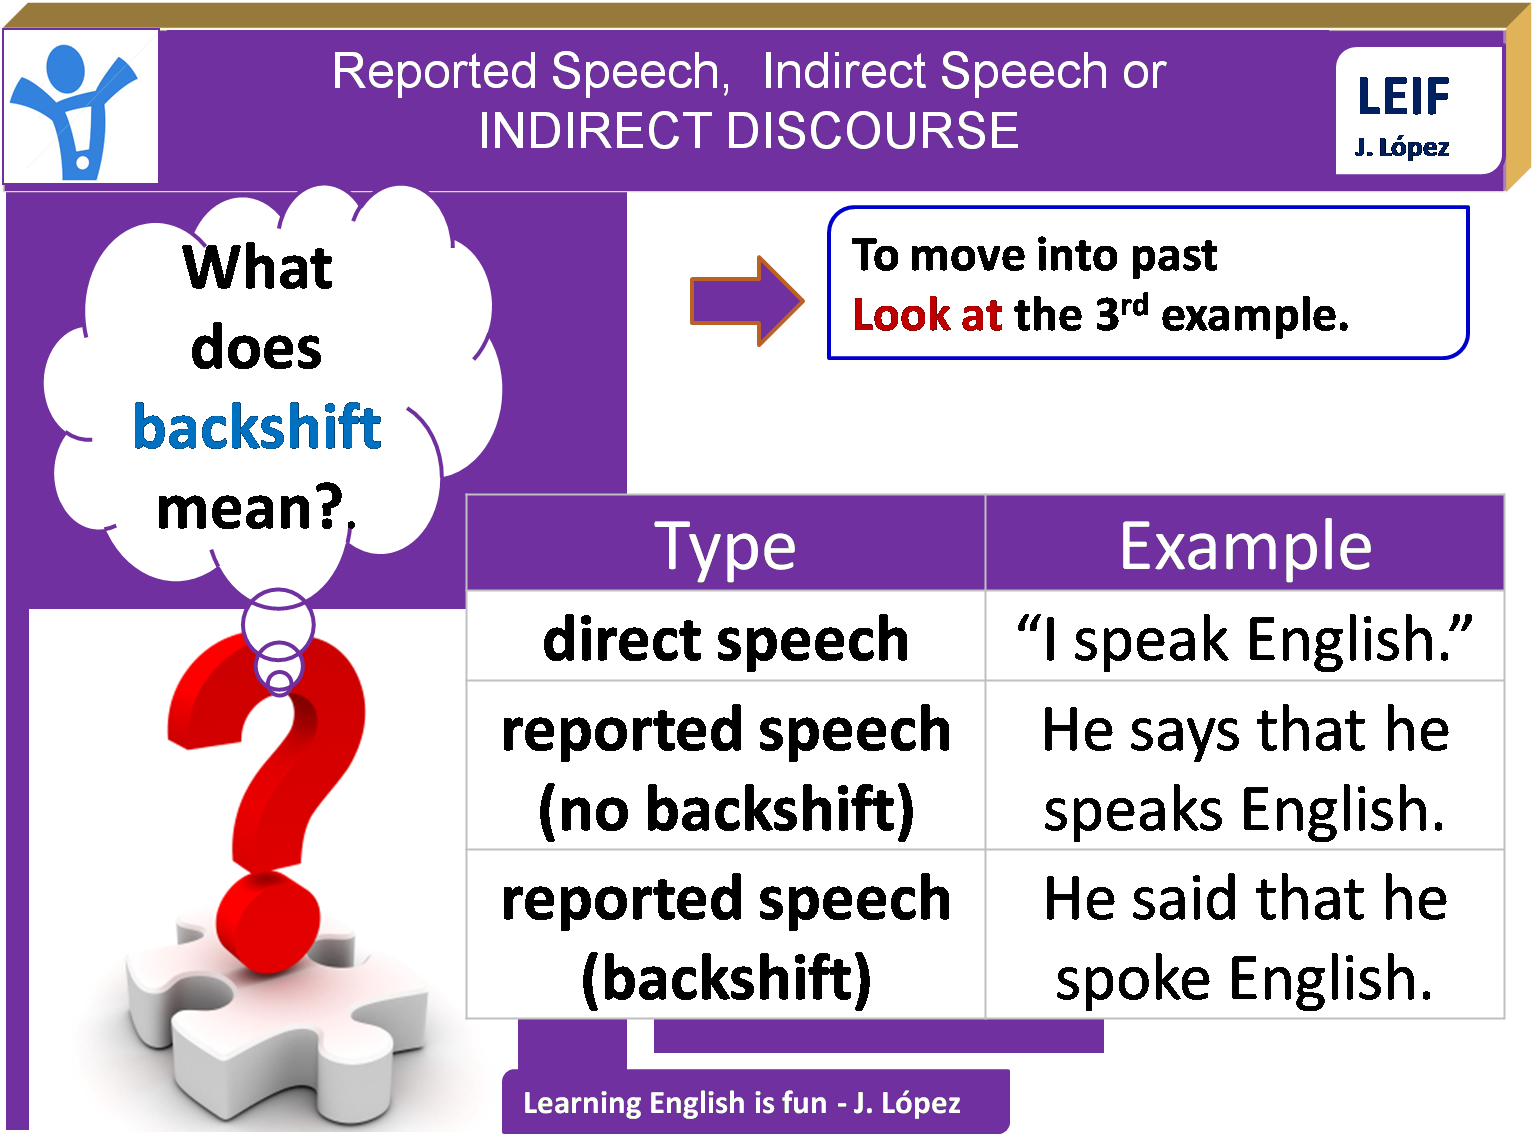 Reported Speech. Direct indirect reported Speech. Reported Speech and indirect Speech. Reported indirect Speech.